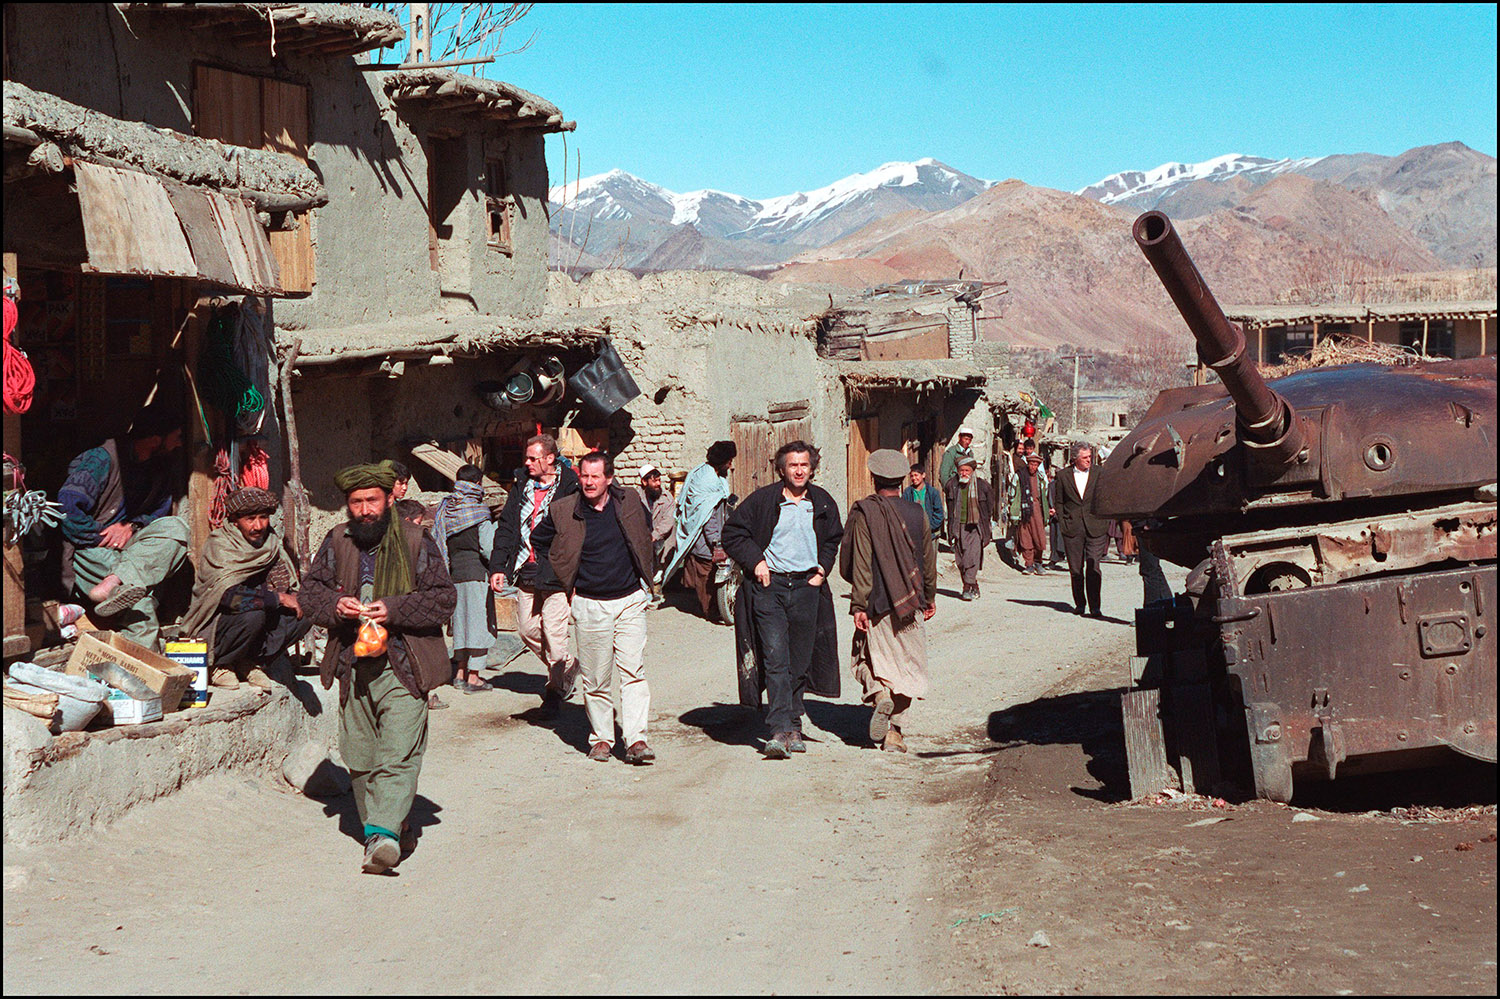 In a village, on the road to Bamiyan, with Gilles Hertzog (right) and Frédéric Tissot (left), a humanitarian doctor who was temporarily chargé d'affaires at the French Embassy in Kabul.